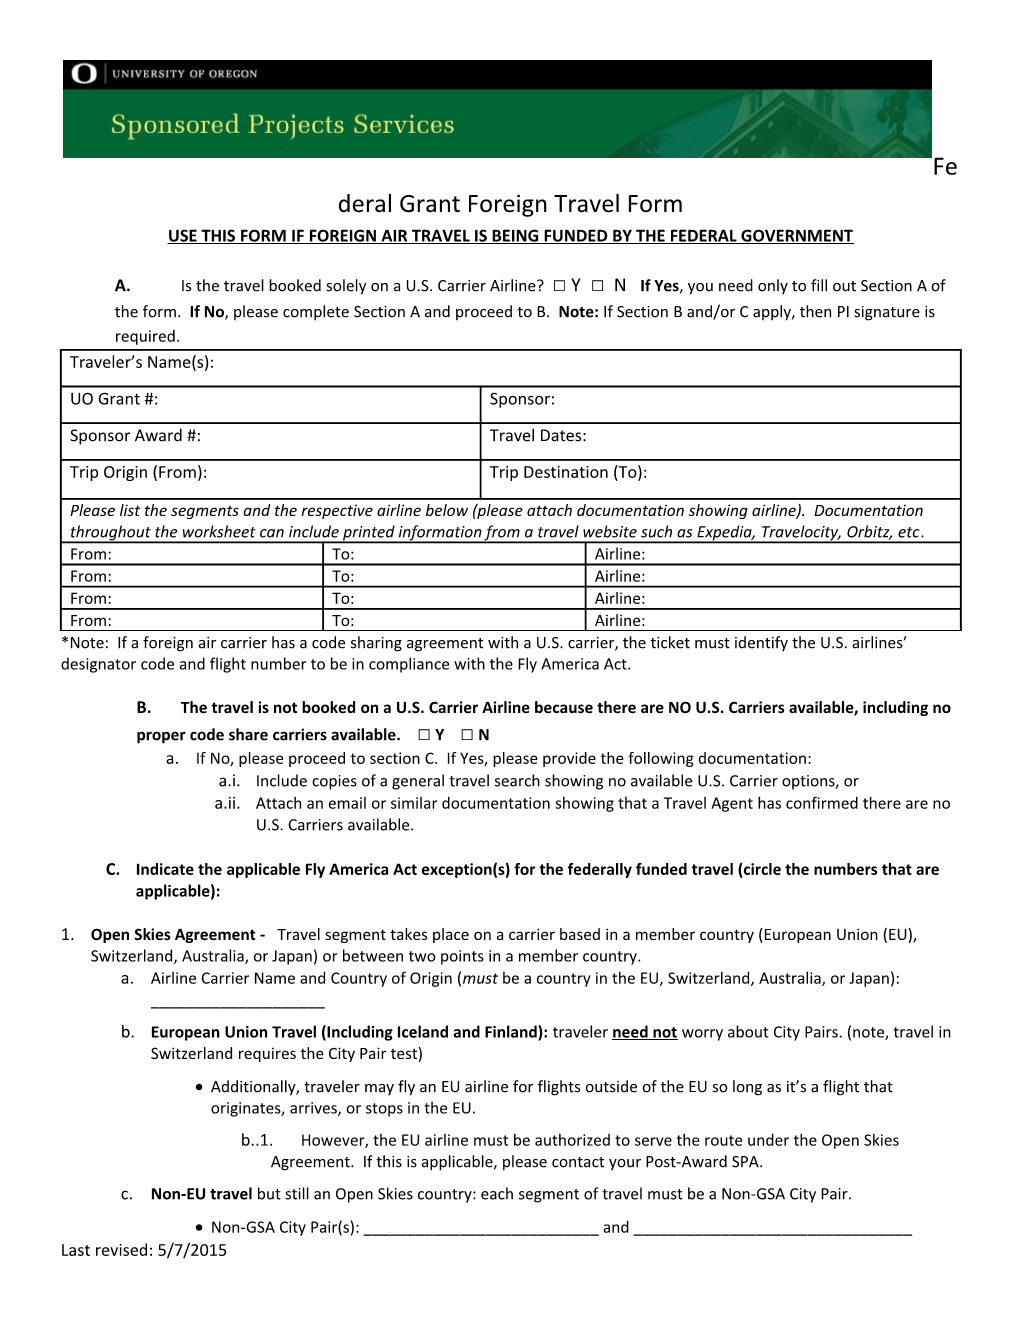 Use This Form If Foreign Air Travel Is Being Funded by the Federal Government